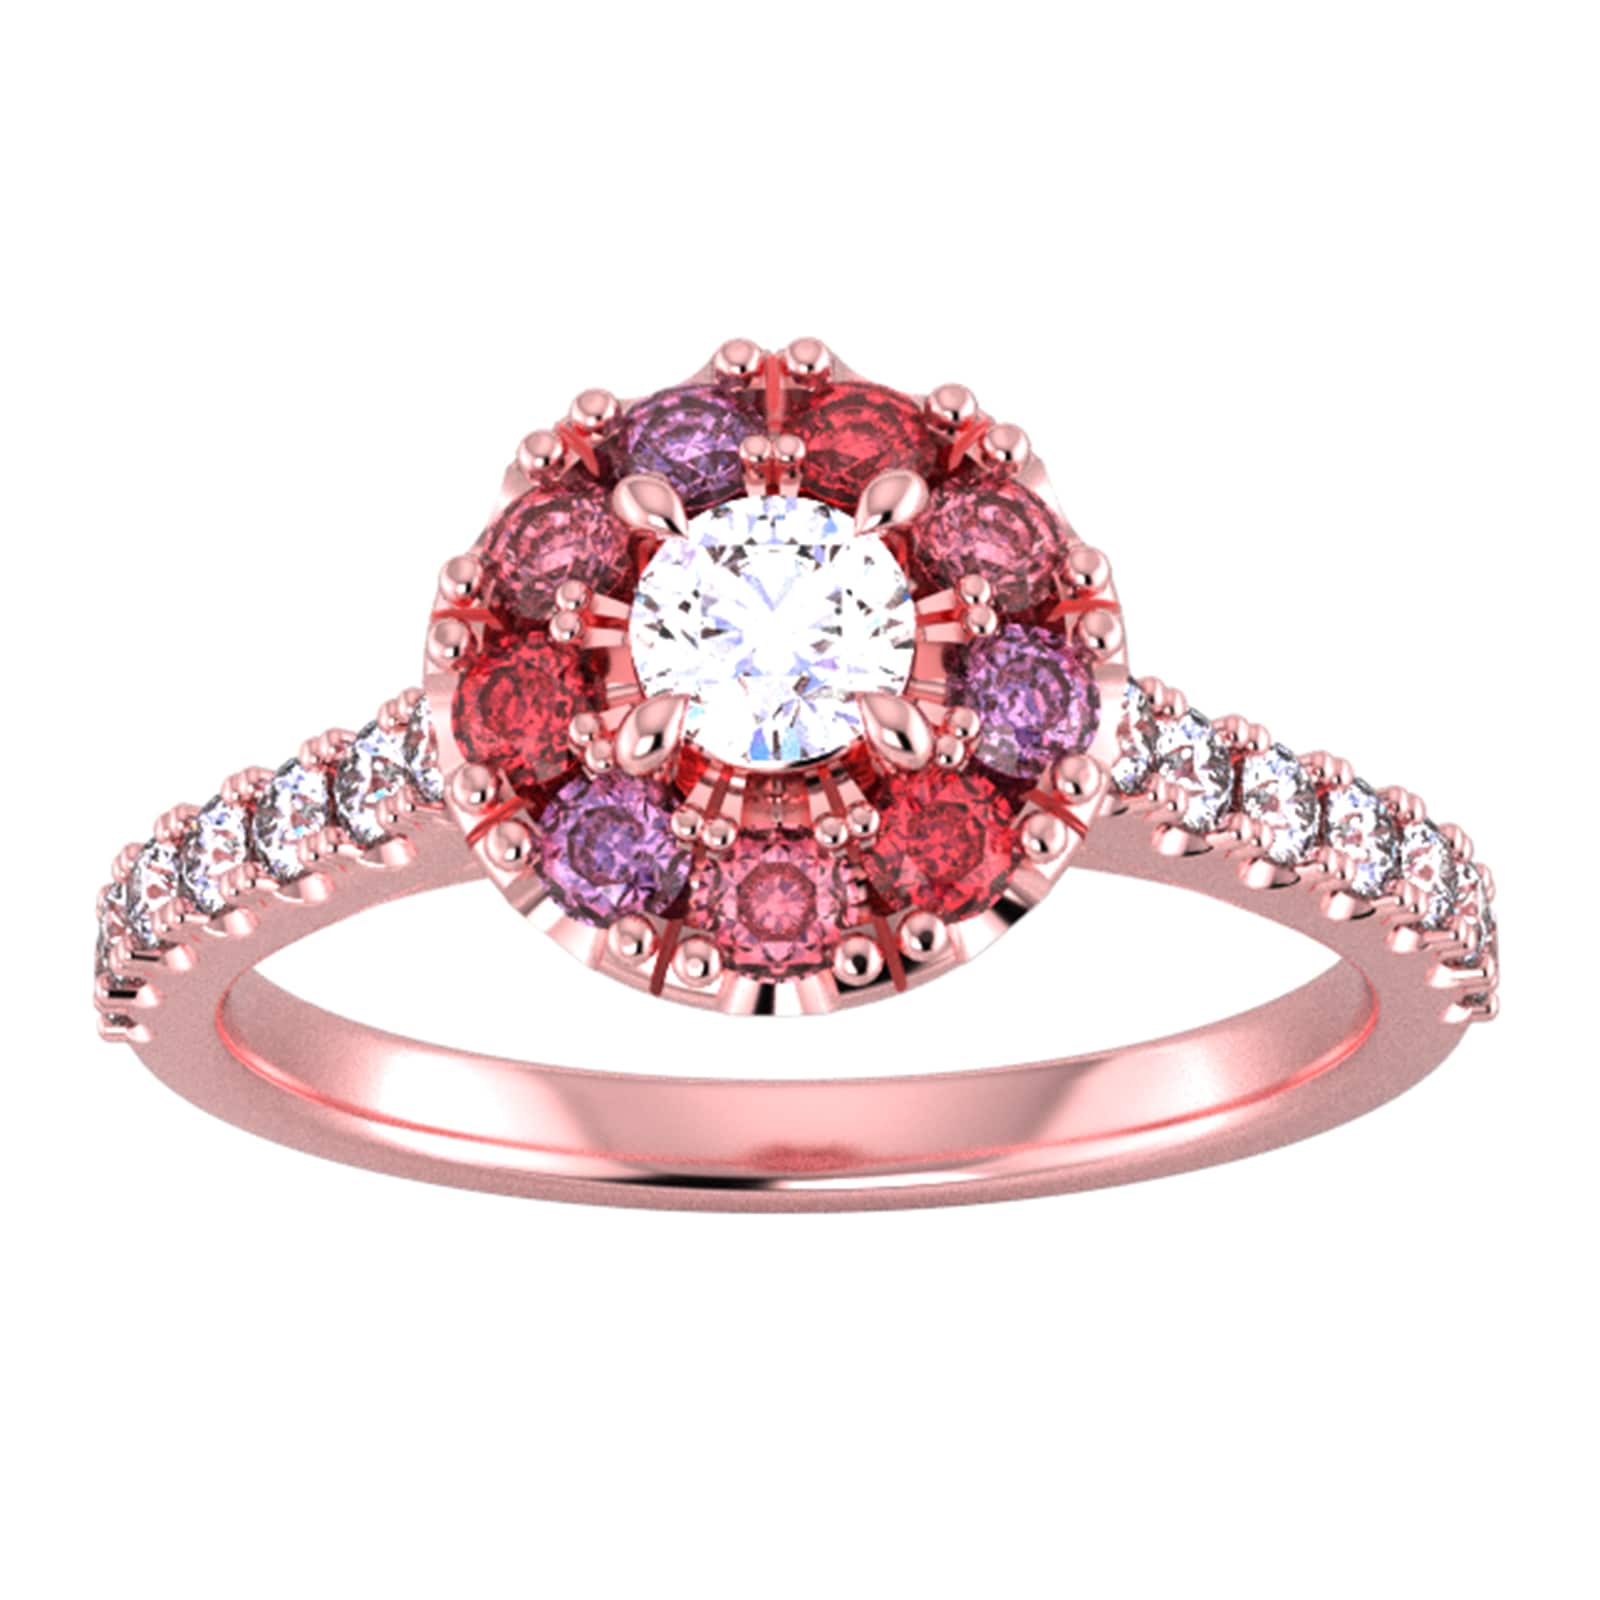 9ct Rose Gold Diamond & Red, Pink, Purple Sapphire Halo Ring - Ring Size C.5